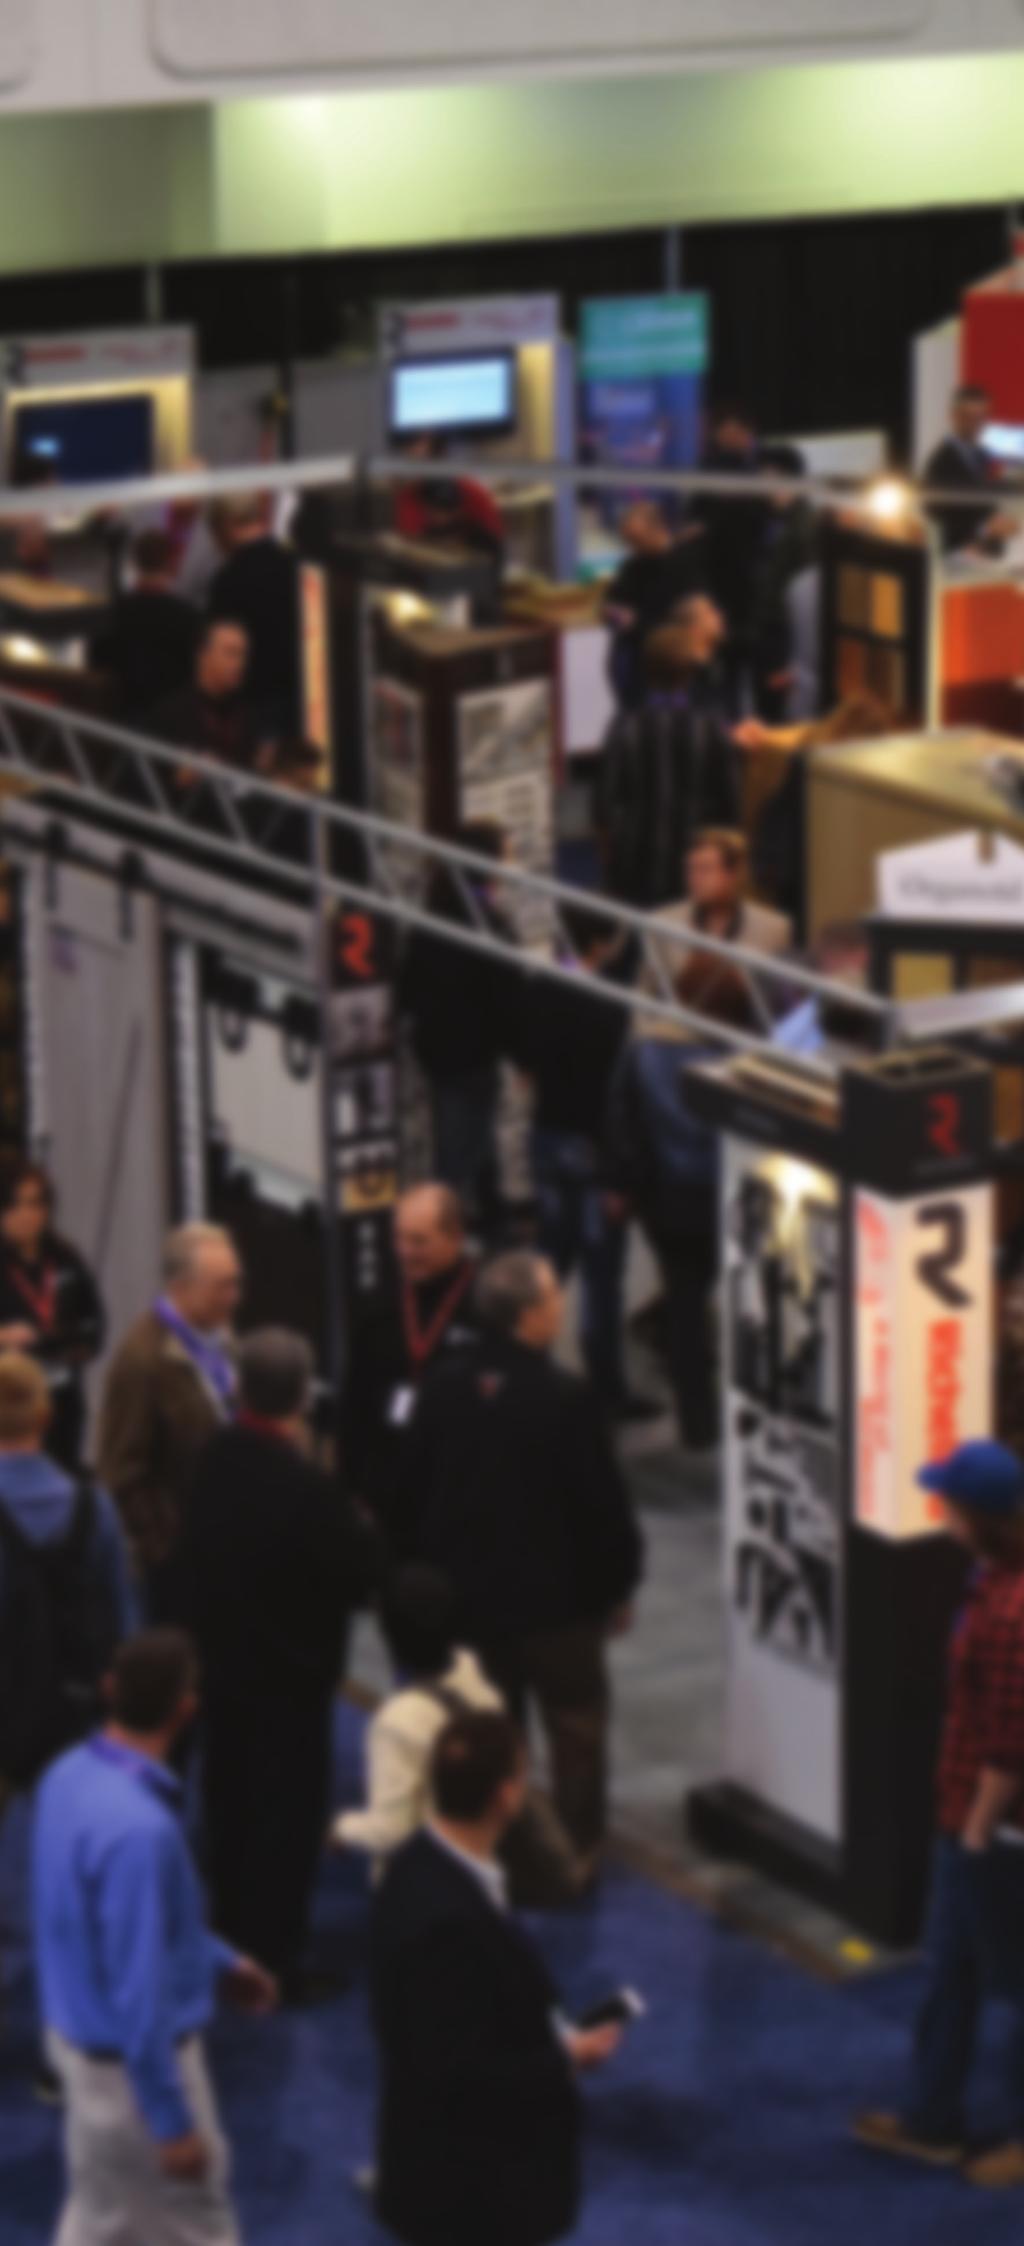 Your WMS Exhibit Booth includes: Perfect Venue Canada s premier woodworking event returns to - Halls 1 and 2 of the International Centre - where WMS has enjoyed its highest